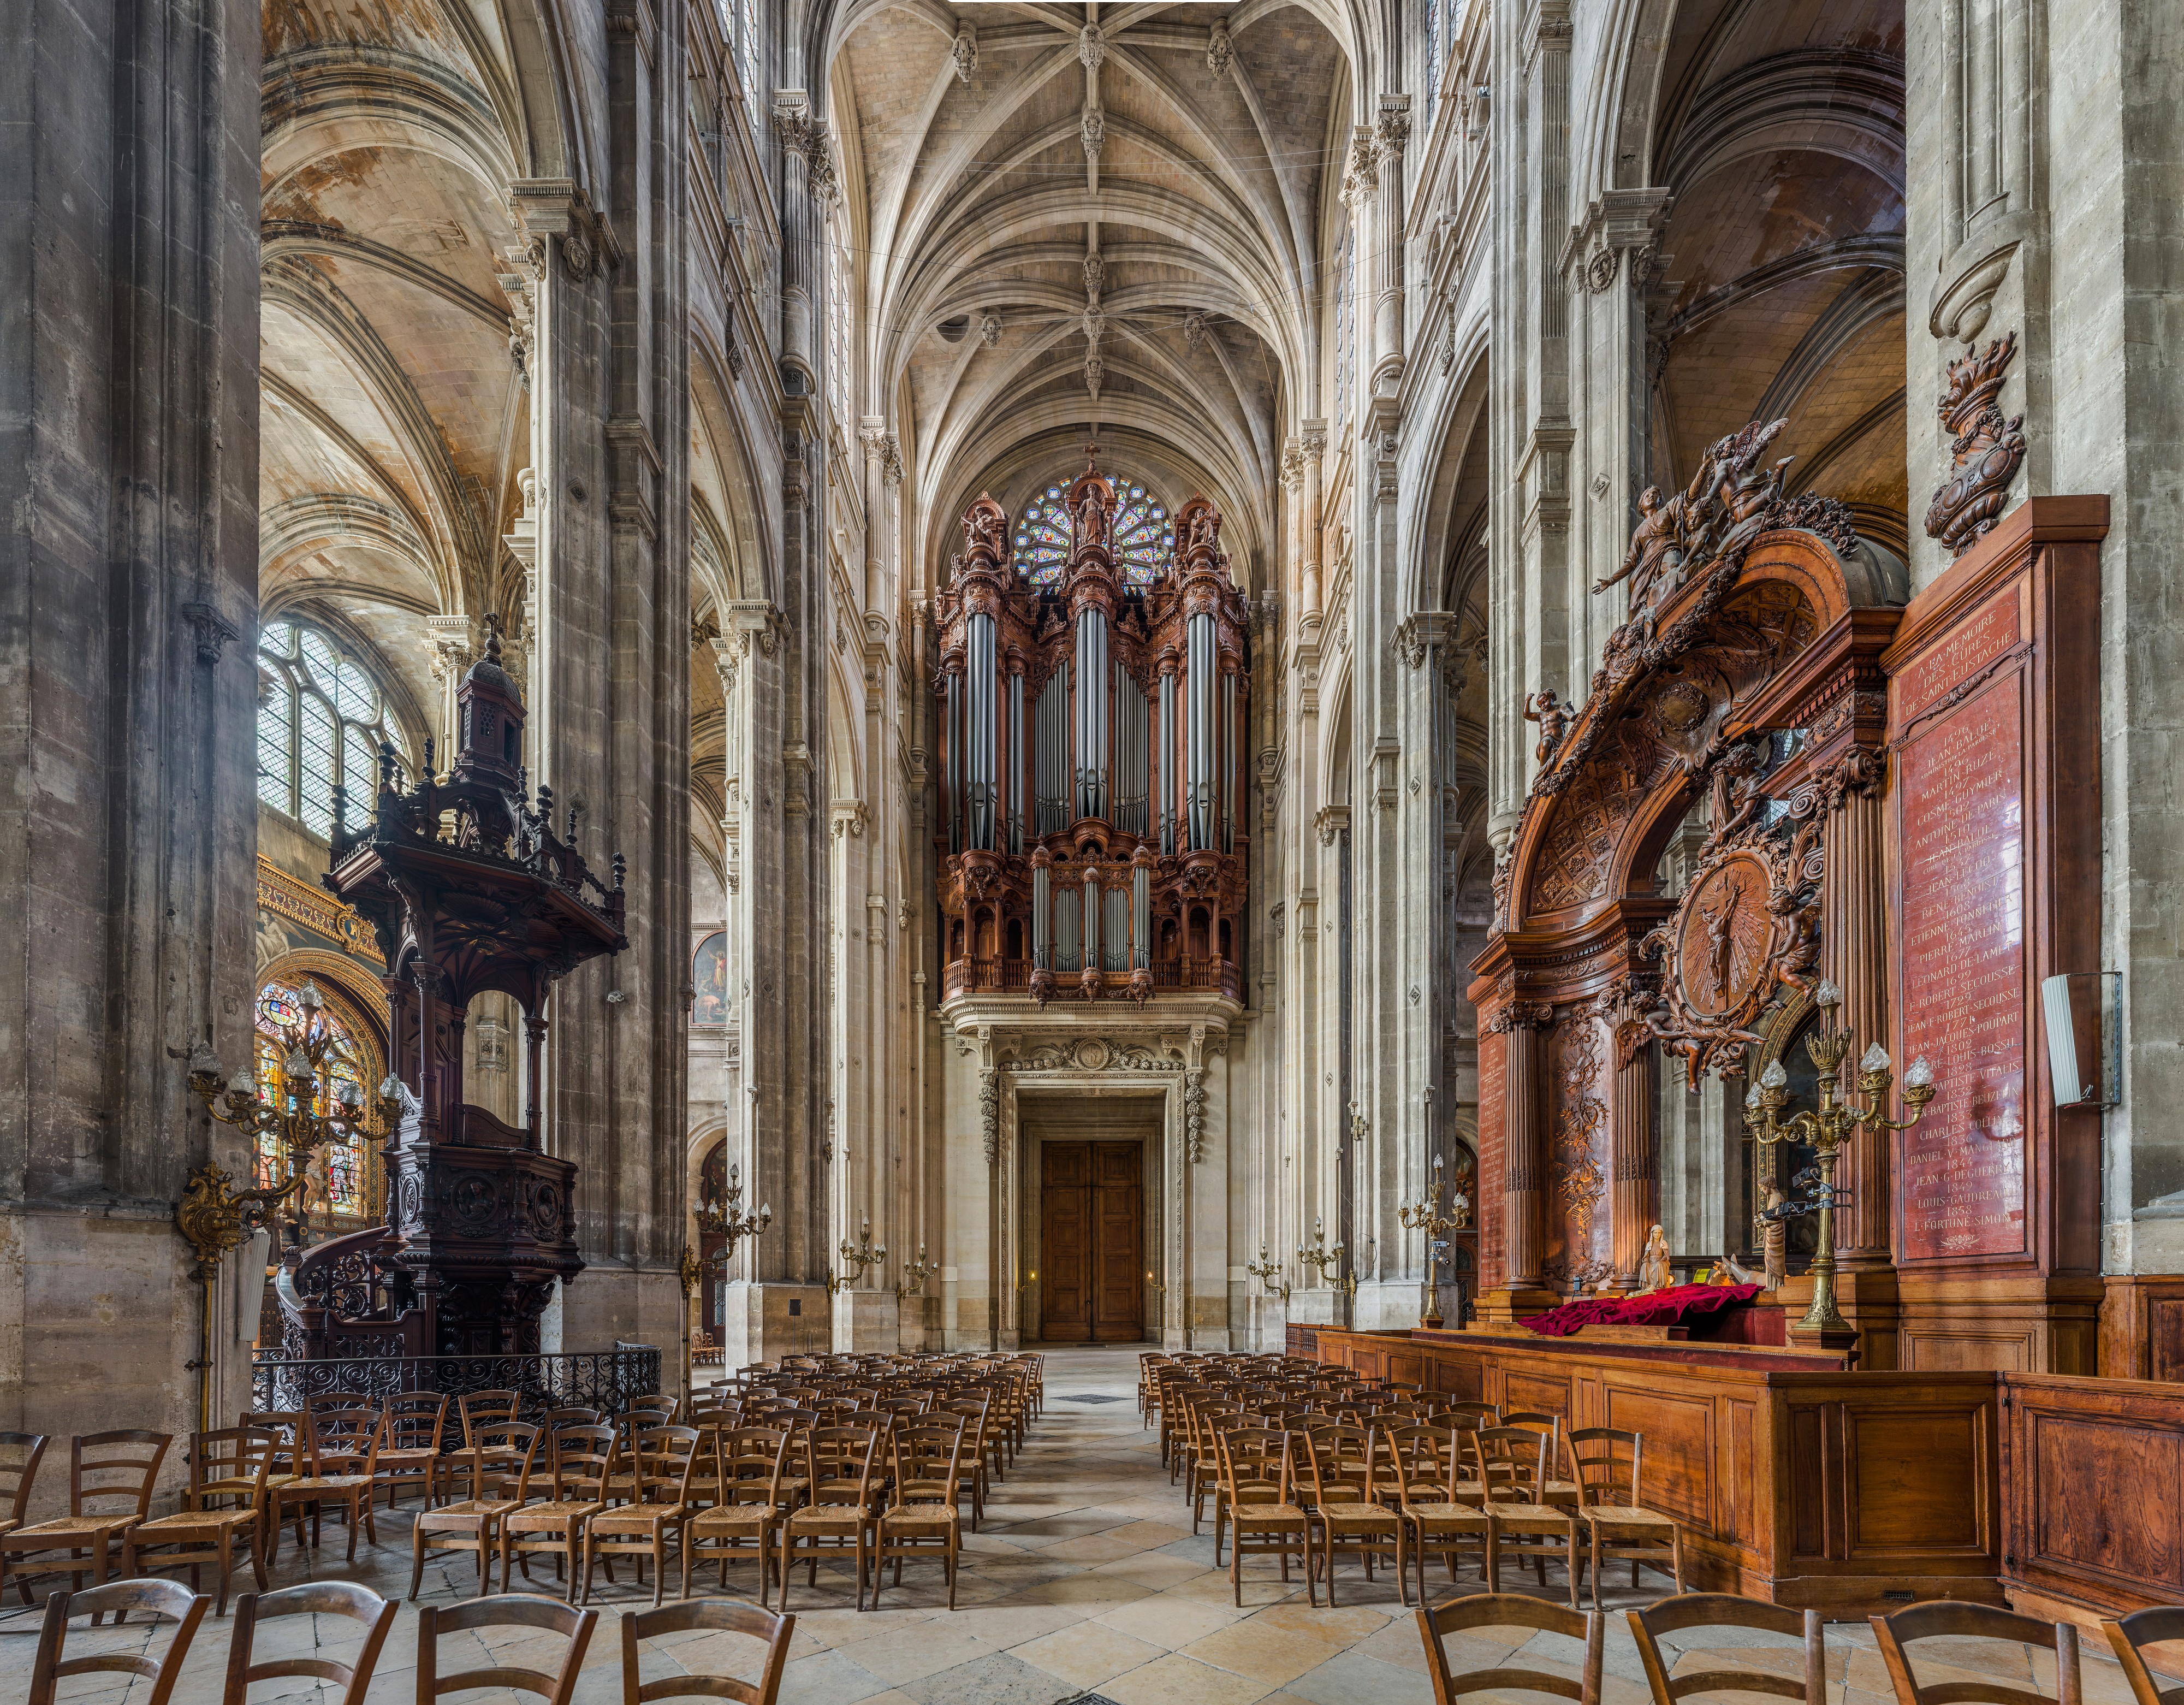 Church of St Eustace Organ and Pulpit, Paris, France - Diliff